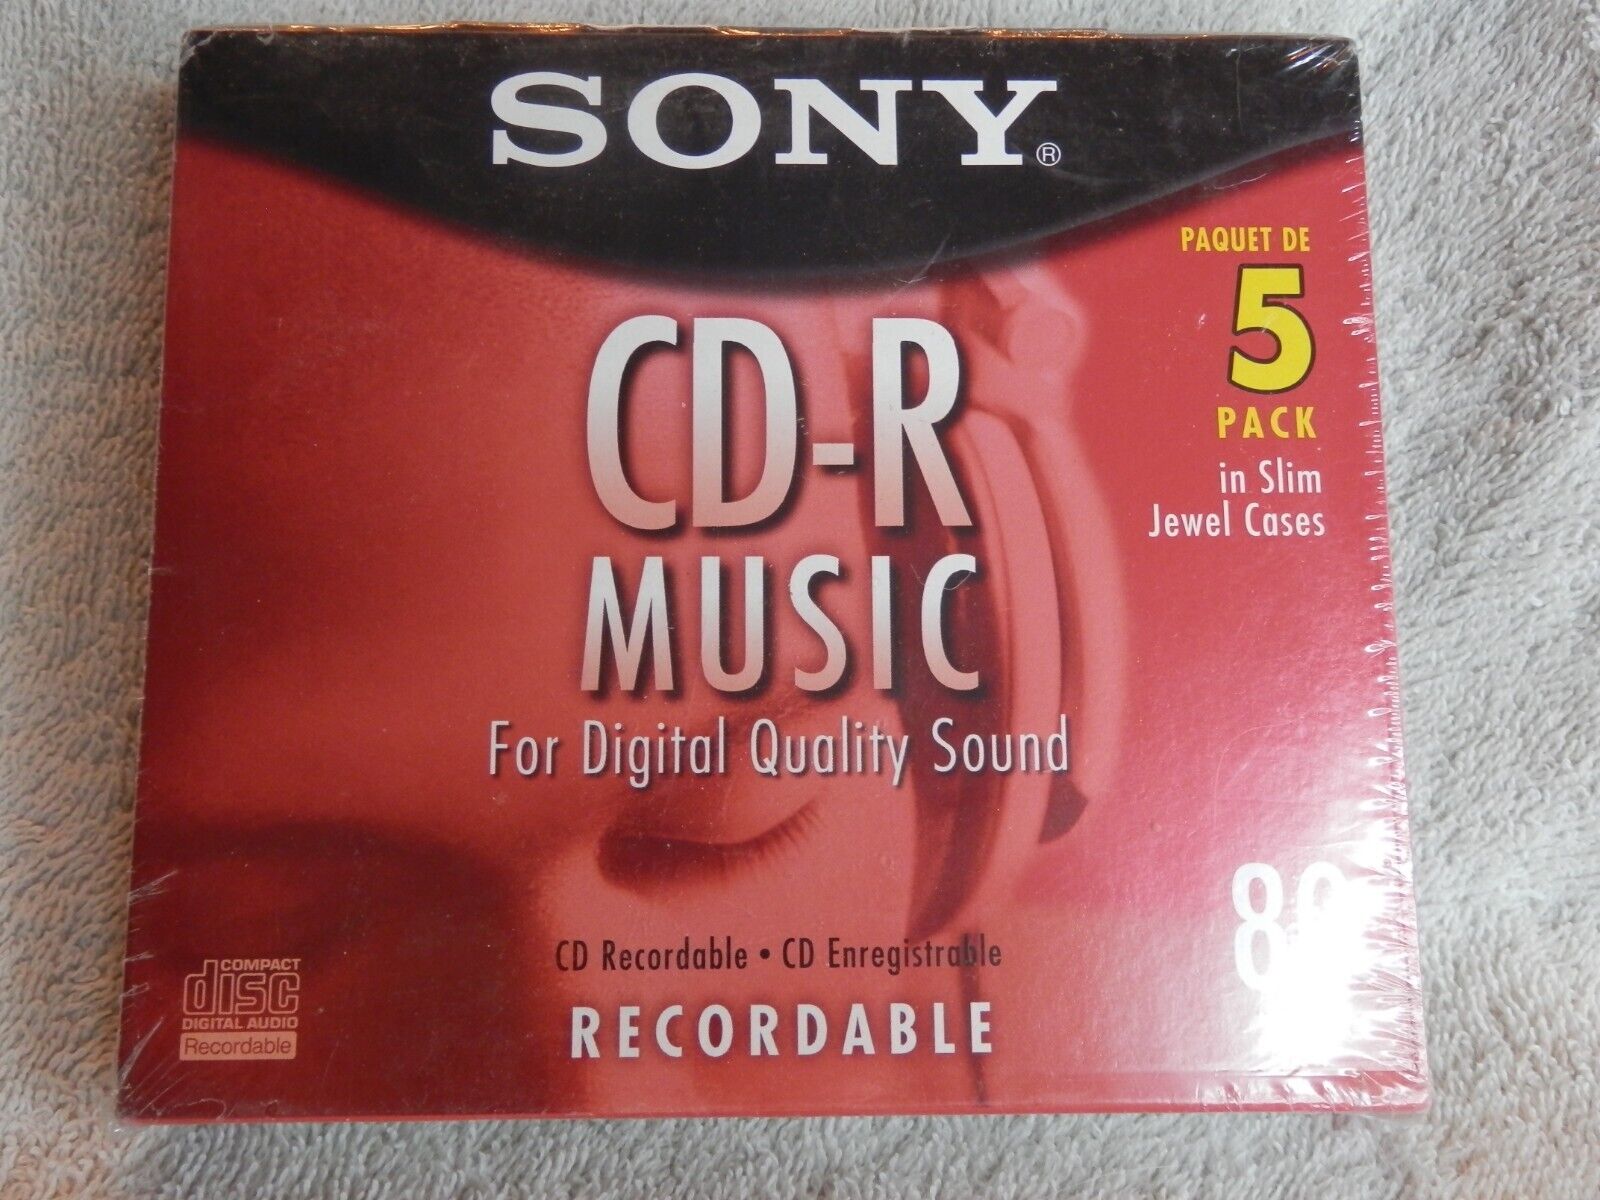 Brand New/Still Sealed Sony CD-R Music Recordable 80 min.  5 Pack